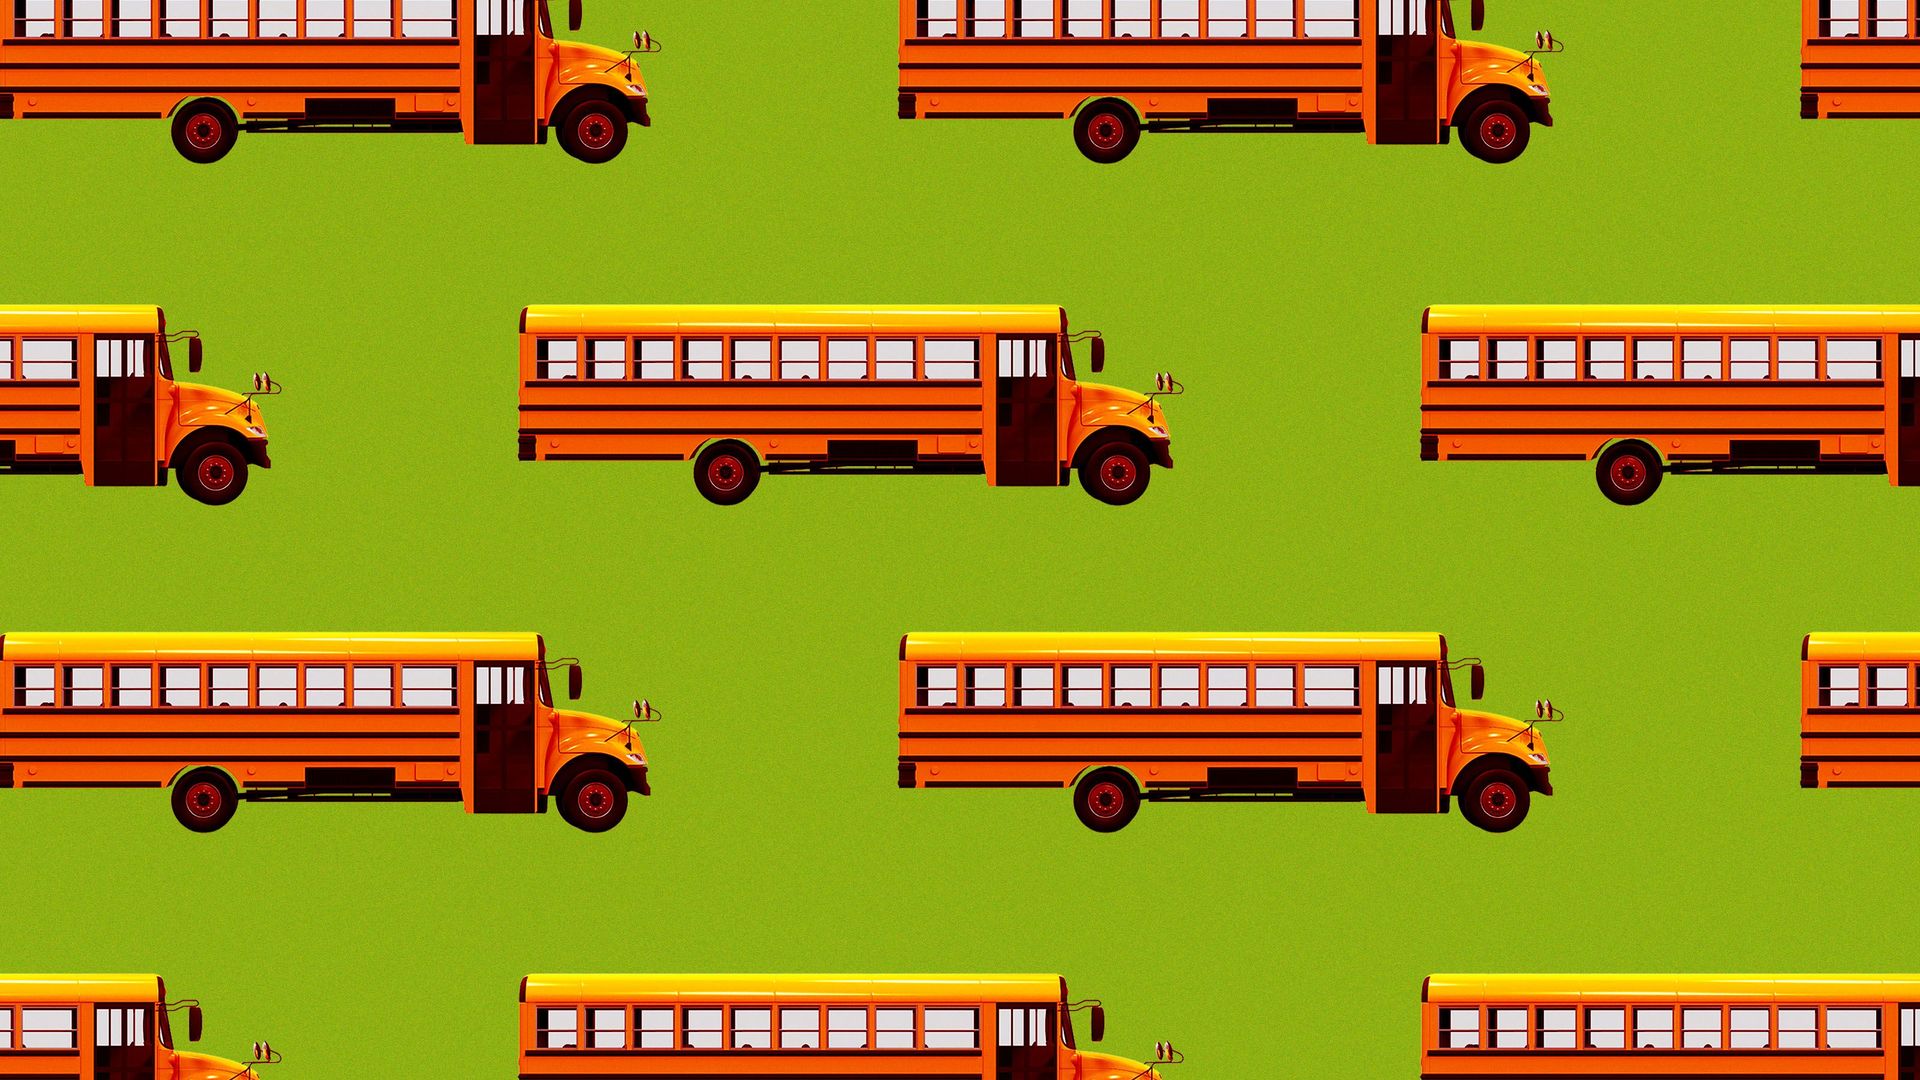 Illustration of a pattern of beer school buses.